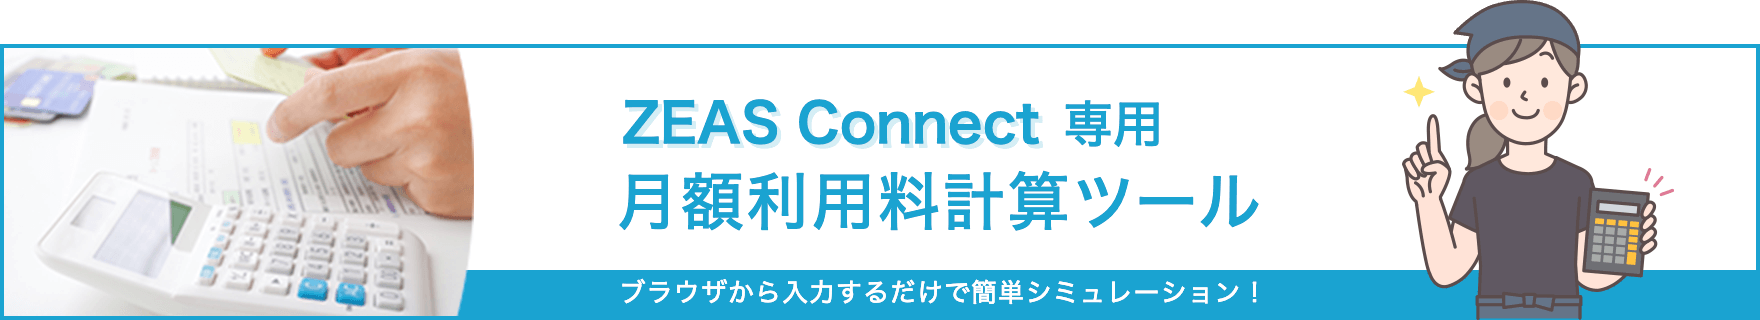 Zeas Connect専用　月額利用料計算ツール